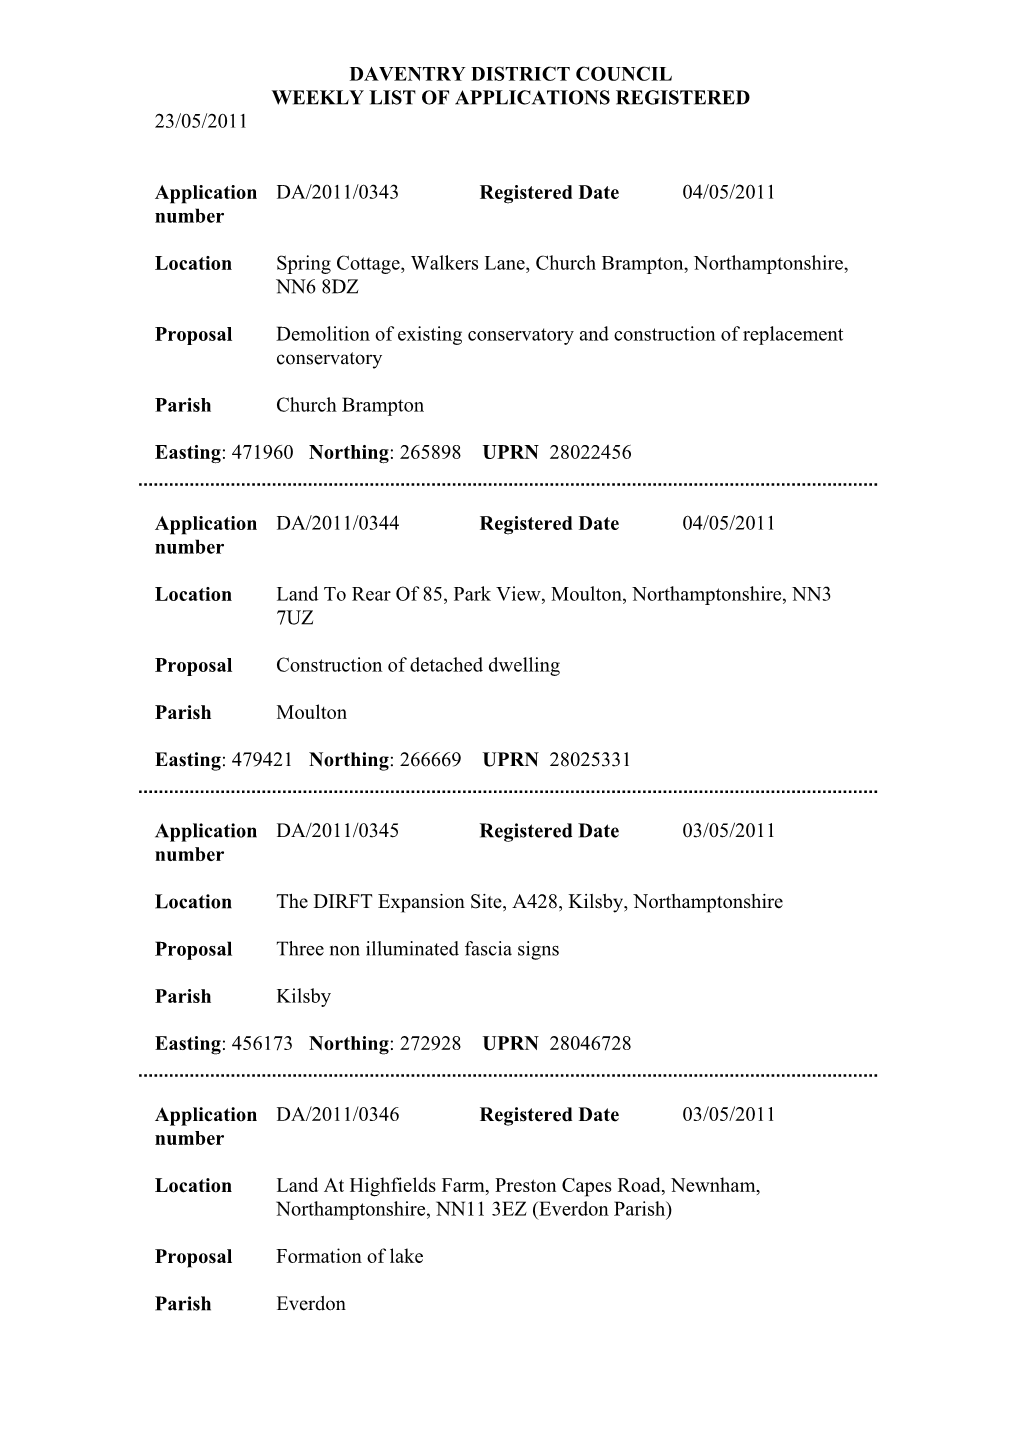 Daventry District Council Weekly List of Applications Registered 23/05/2011